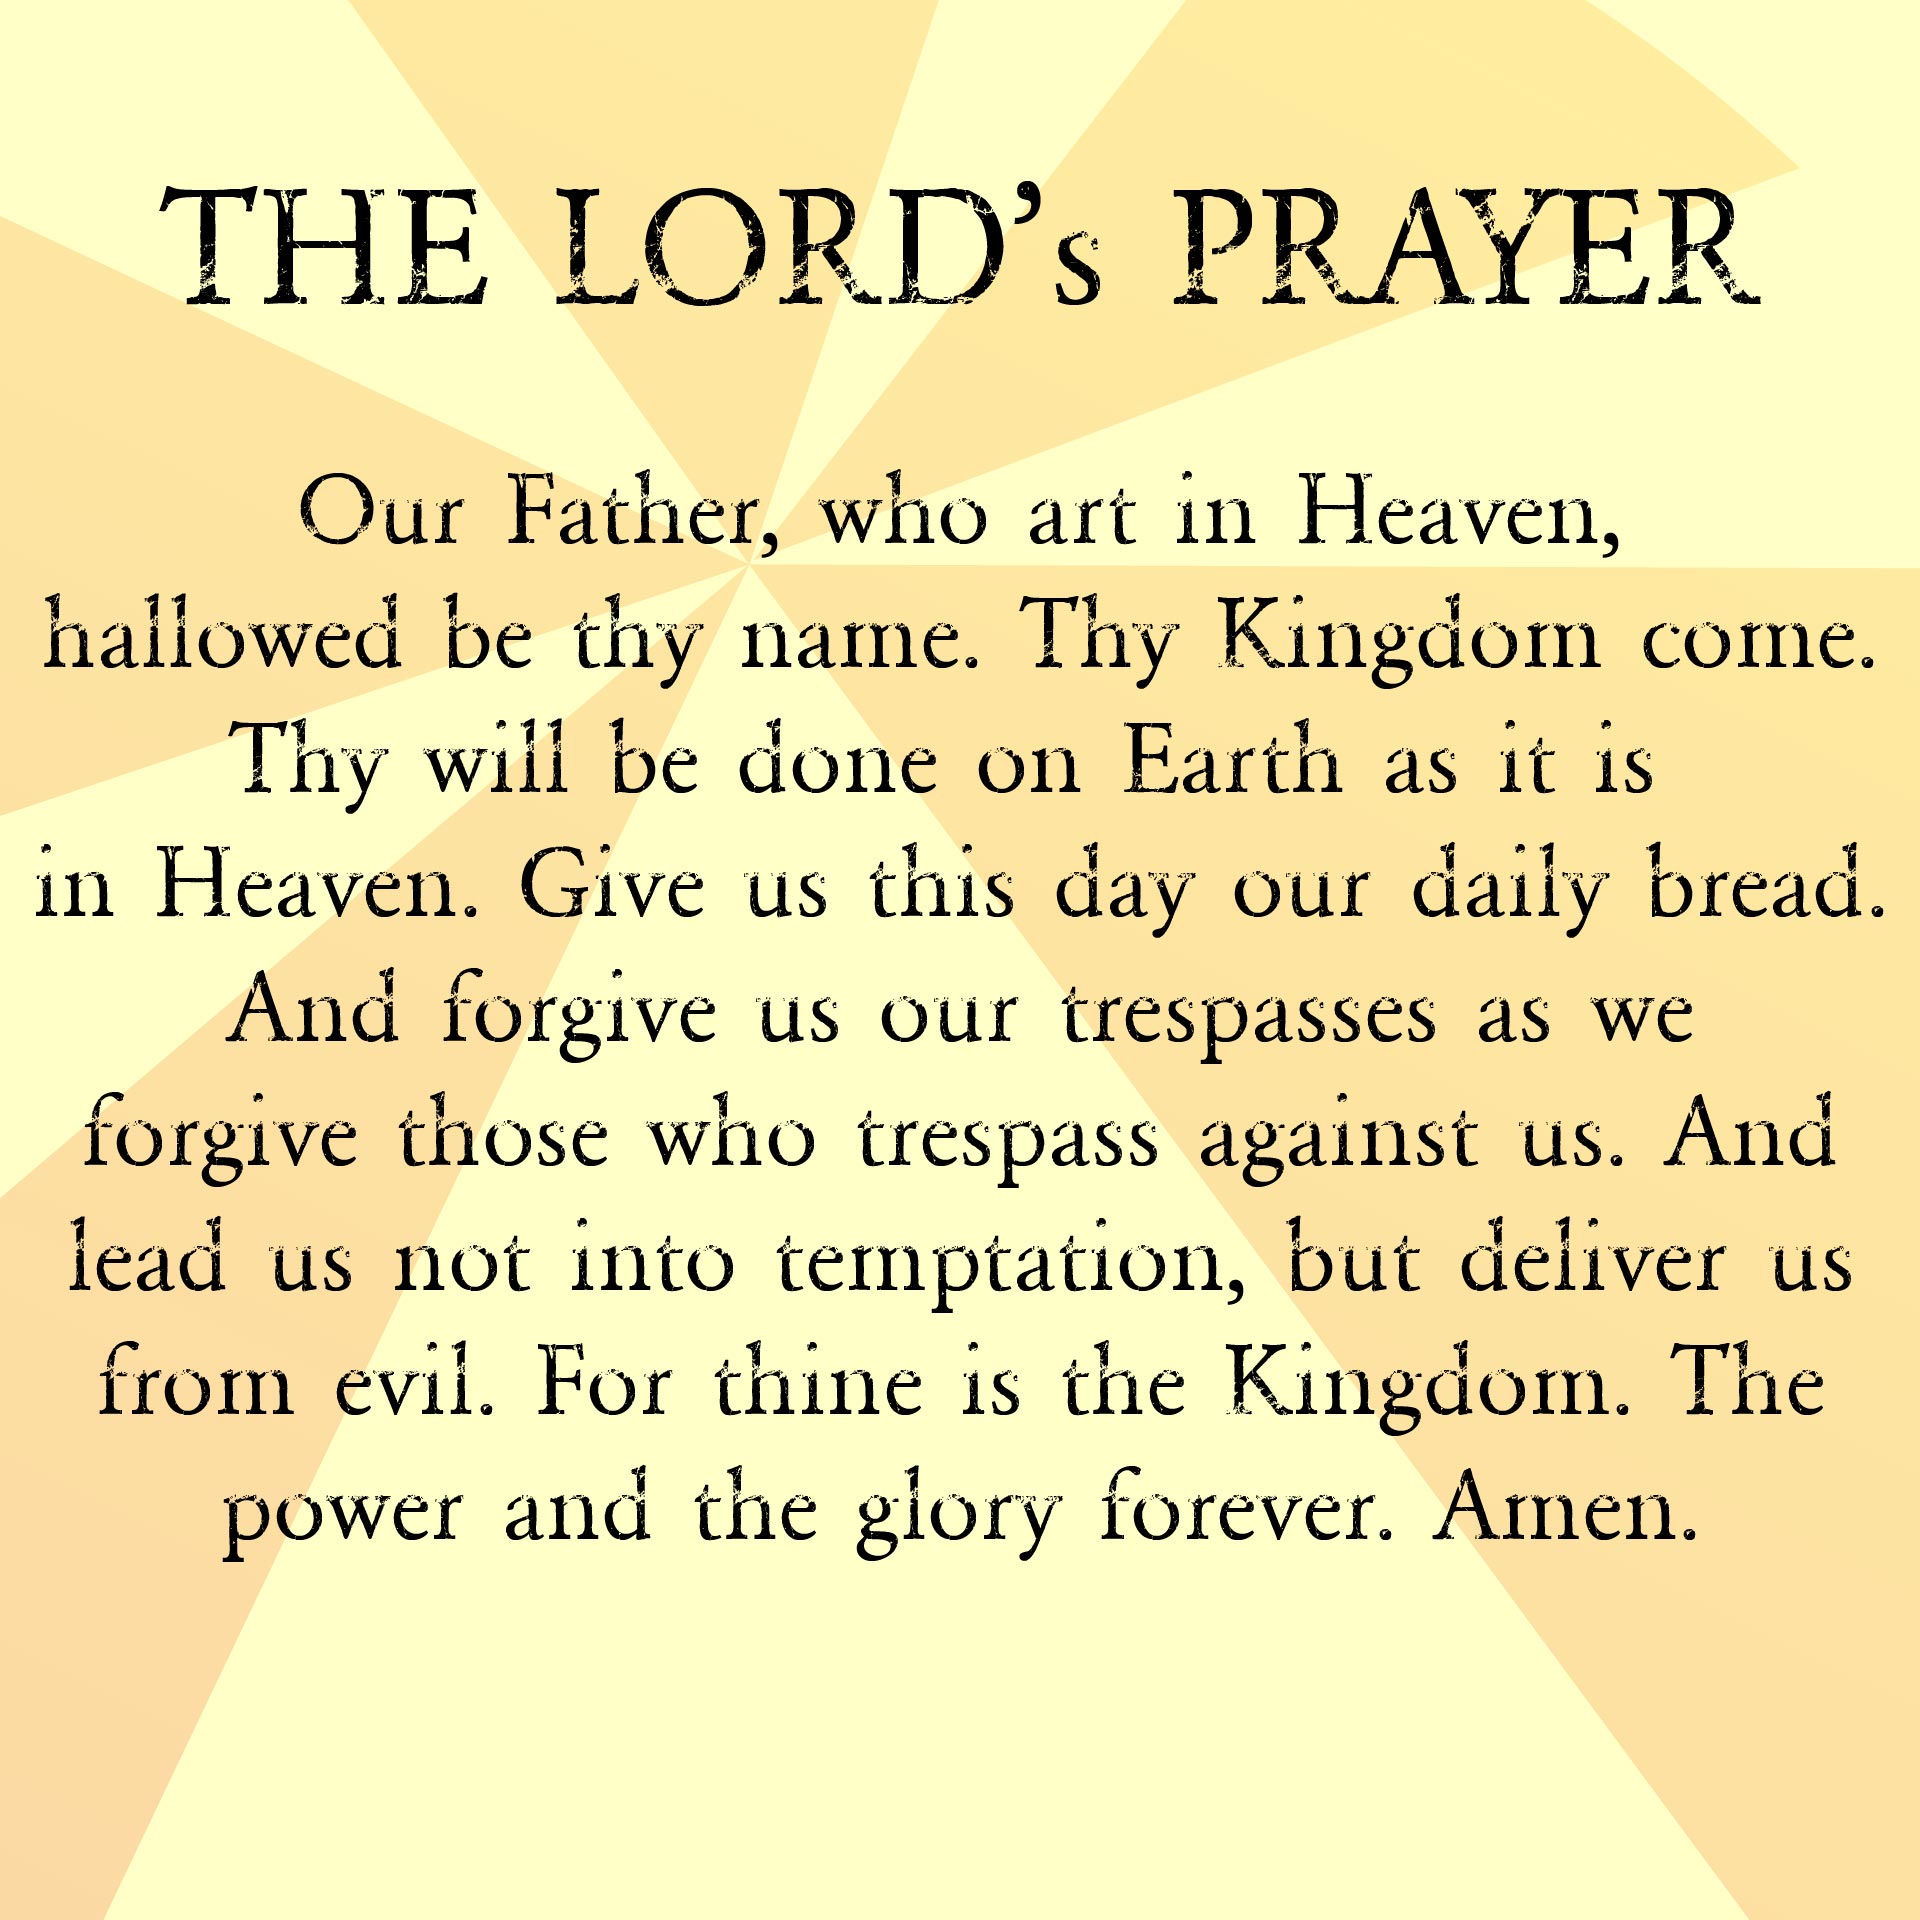 8 Best Images Of The Lord Prayer Printable Lord S Prayer To Print 